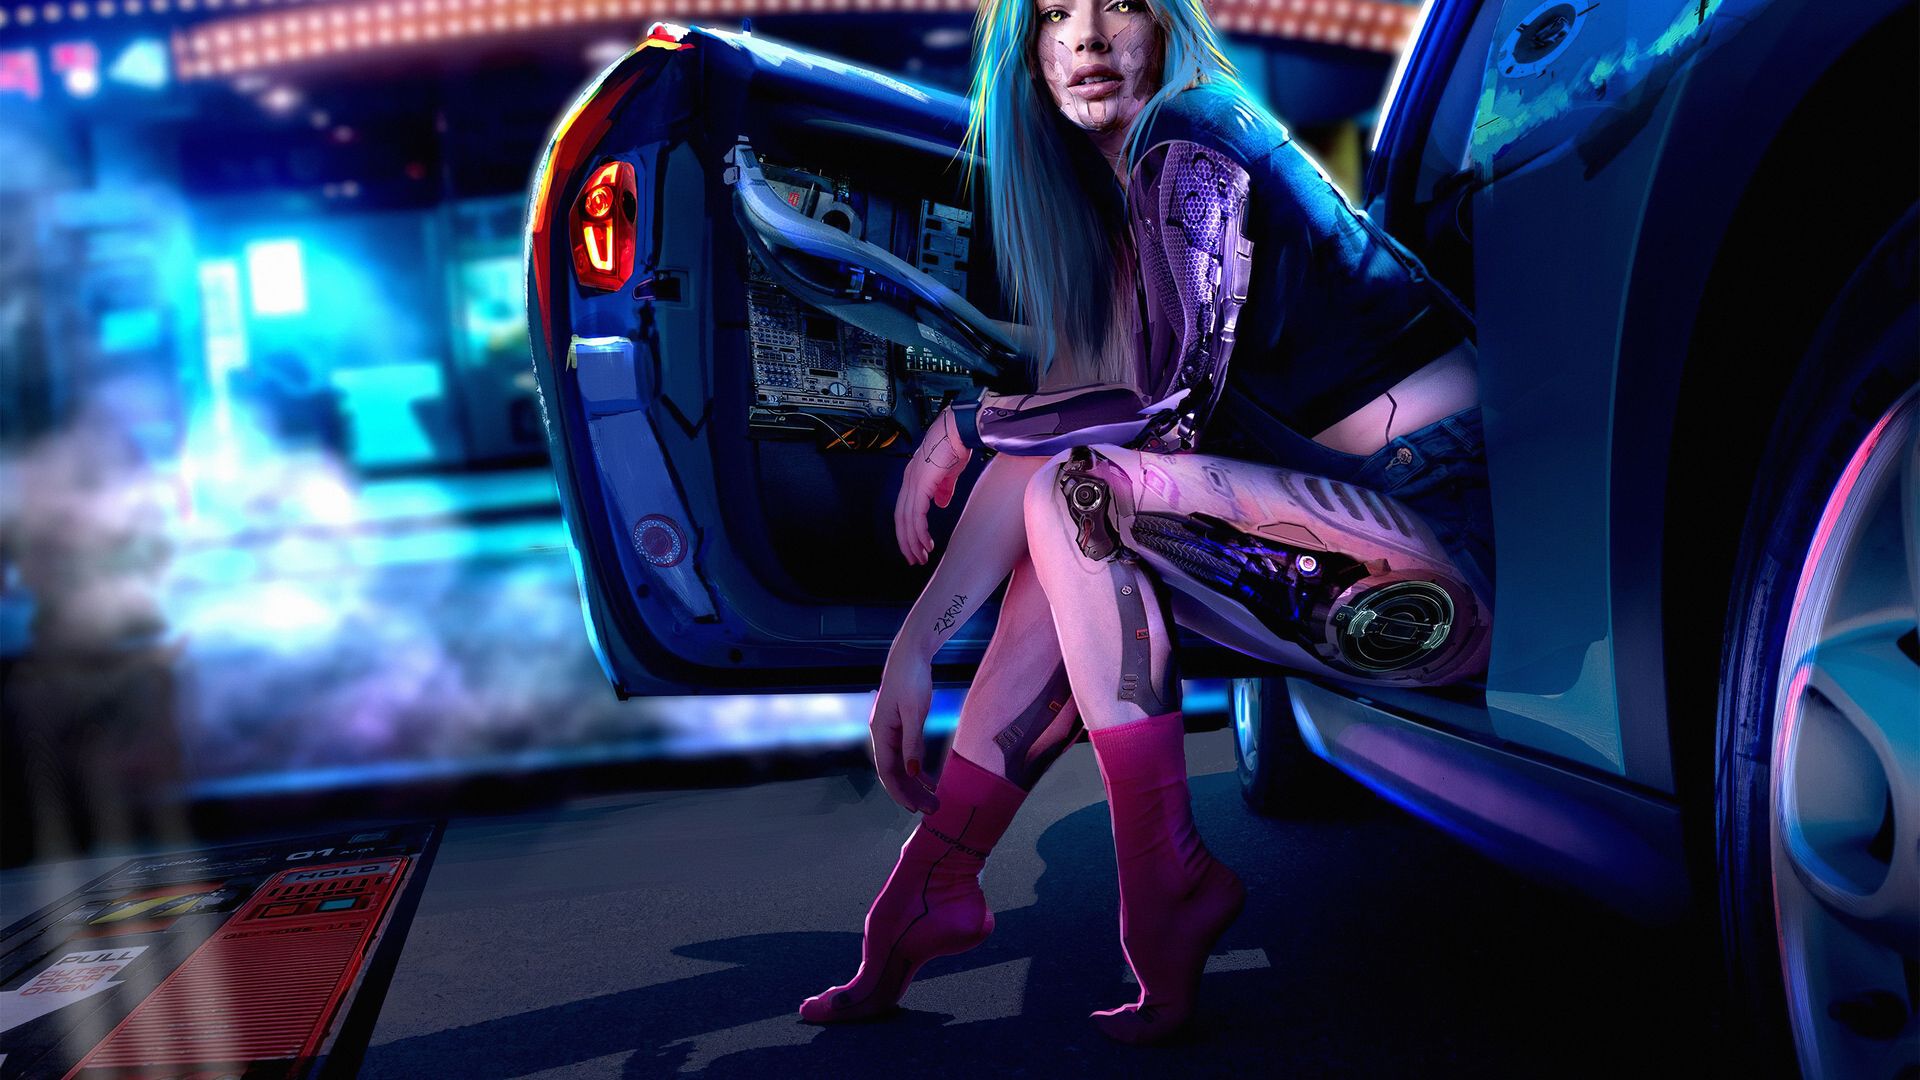 Cyberpunk Girl With Car4k Laptop Full HD 1080P HD 4k Wallpaper, Image, Background, Photo and Picture